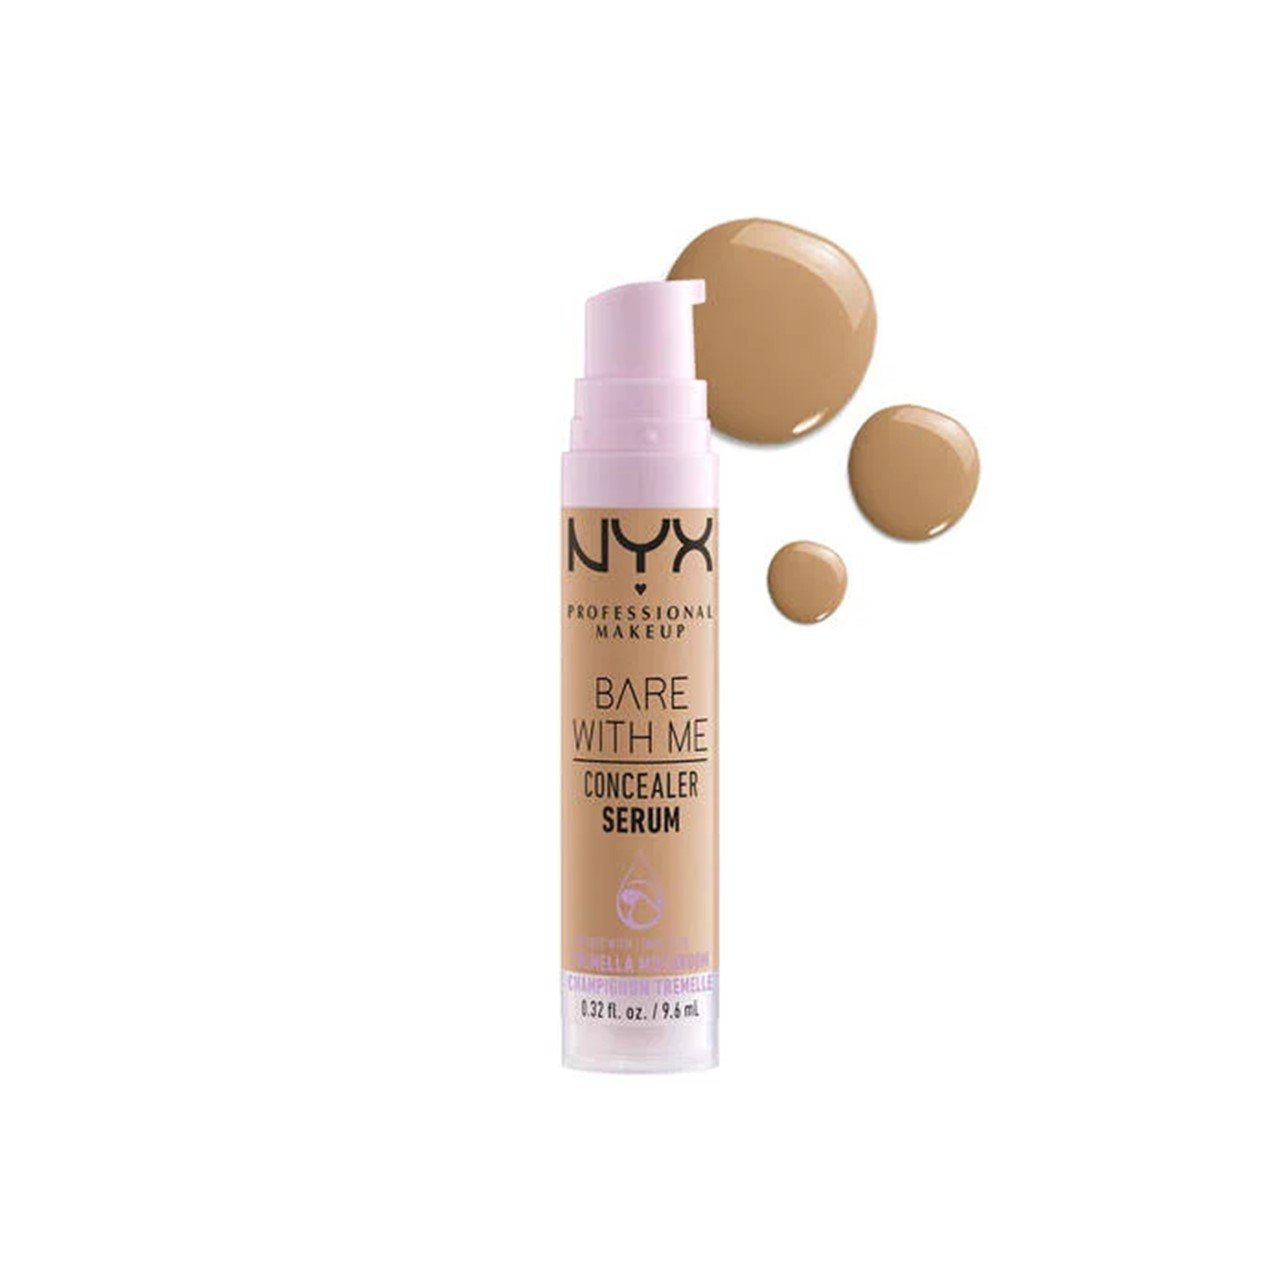 https://static.beautytocare.com/media/catalog/product/n/y/nyx-pro-makeup-bare-with-me-concealer-serum-07-medium-9-6ml.jpg